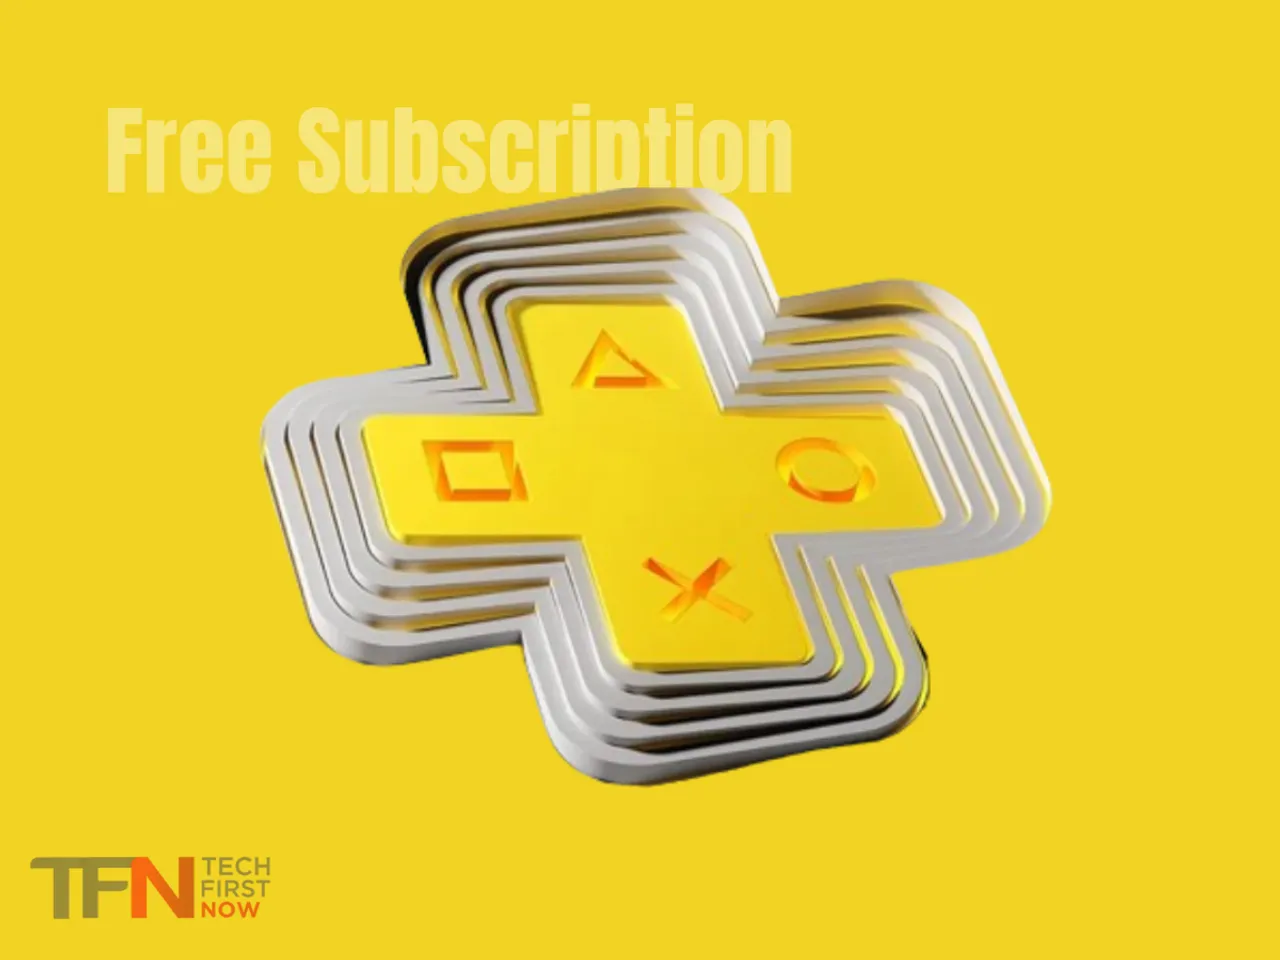 How to claim 12-month Sony PlayStation Plus Premium subscription worth $ 159.99 for free?